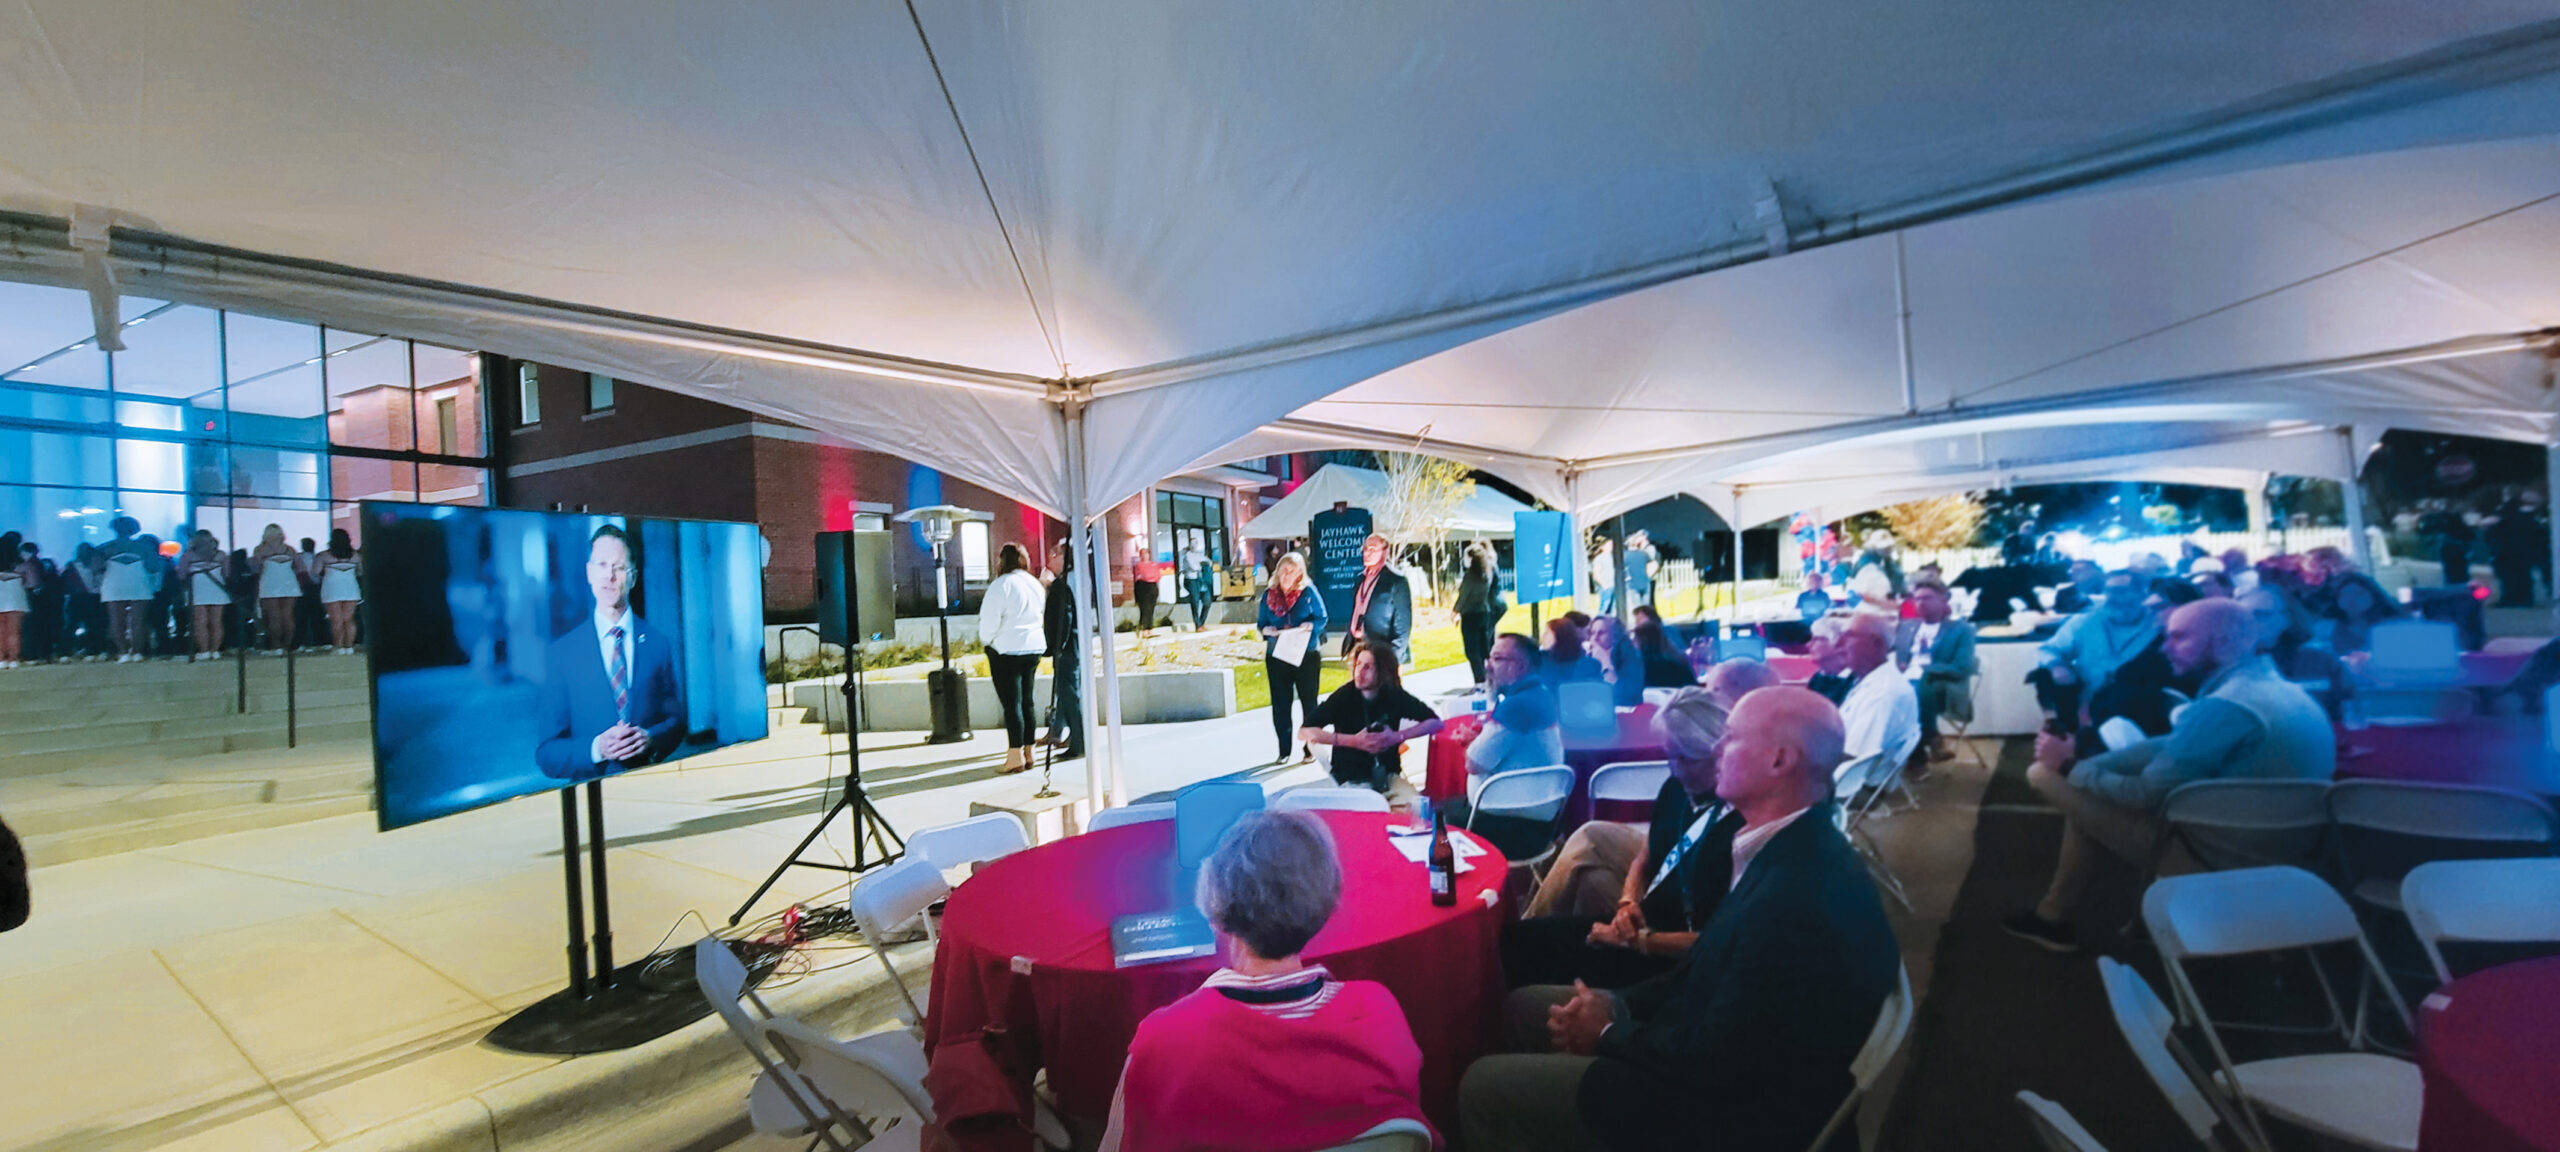 ALL ACCESS:
Event guests participate in the campaign presentations across the Jayhawk Welcome Center — even outside.